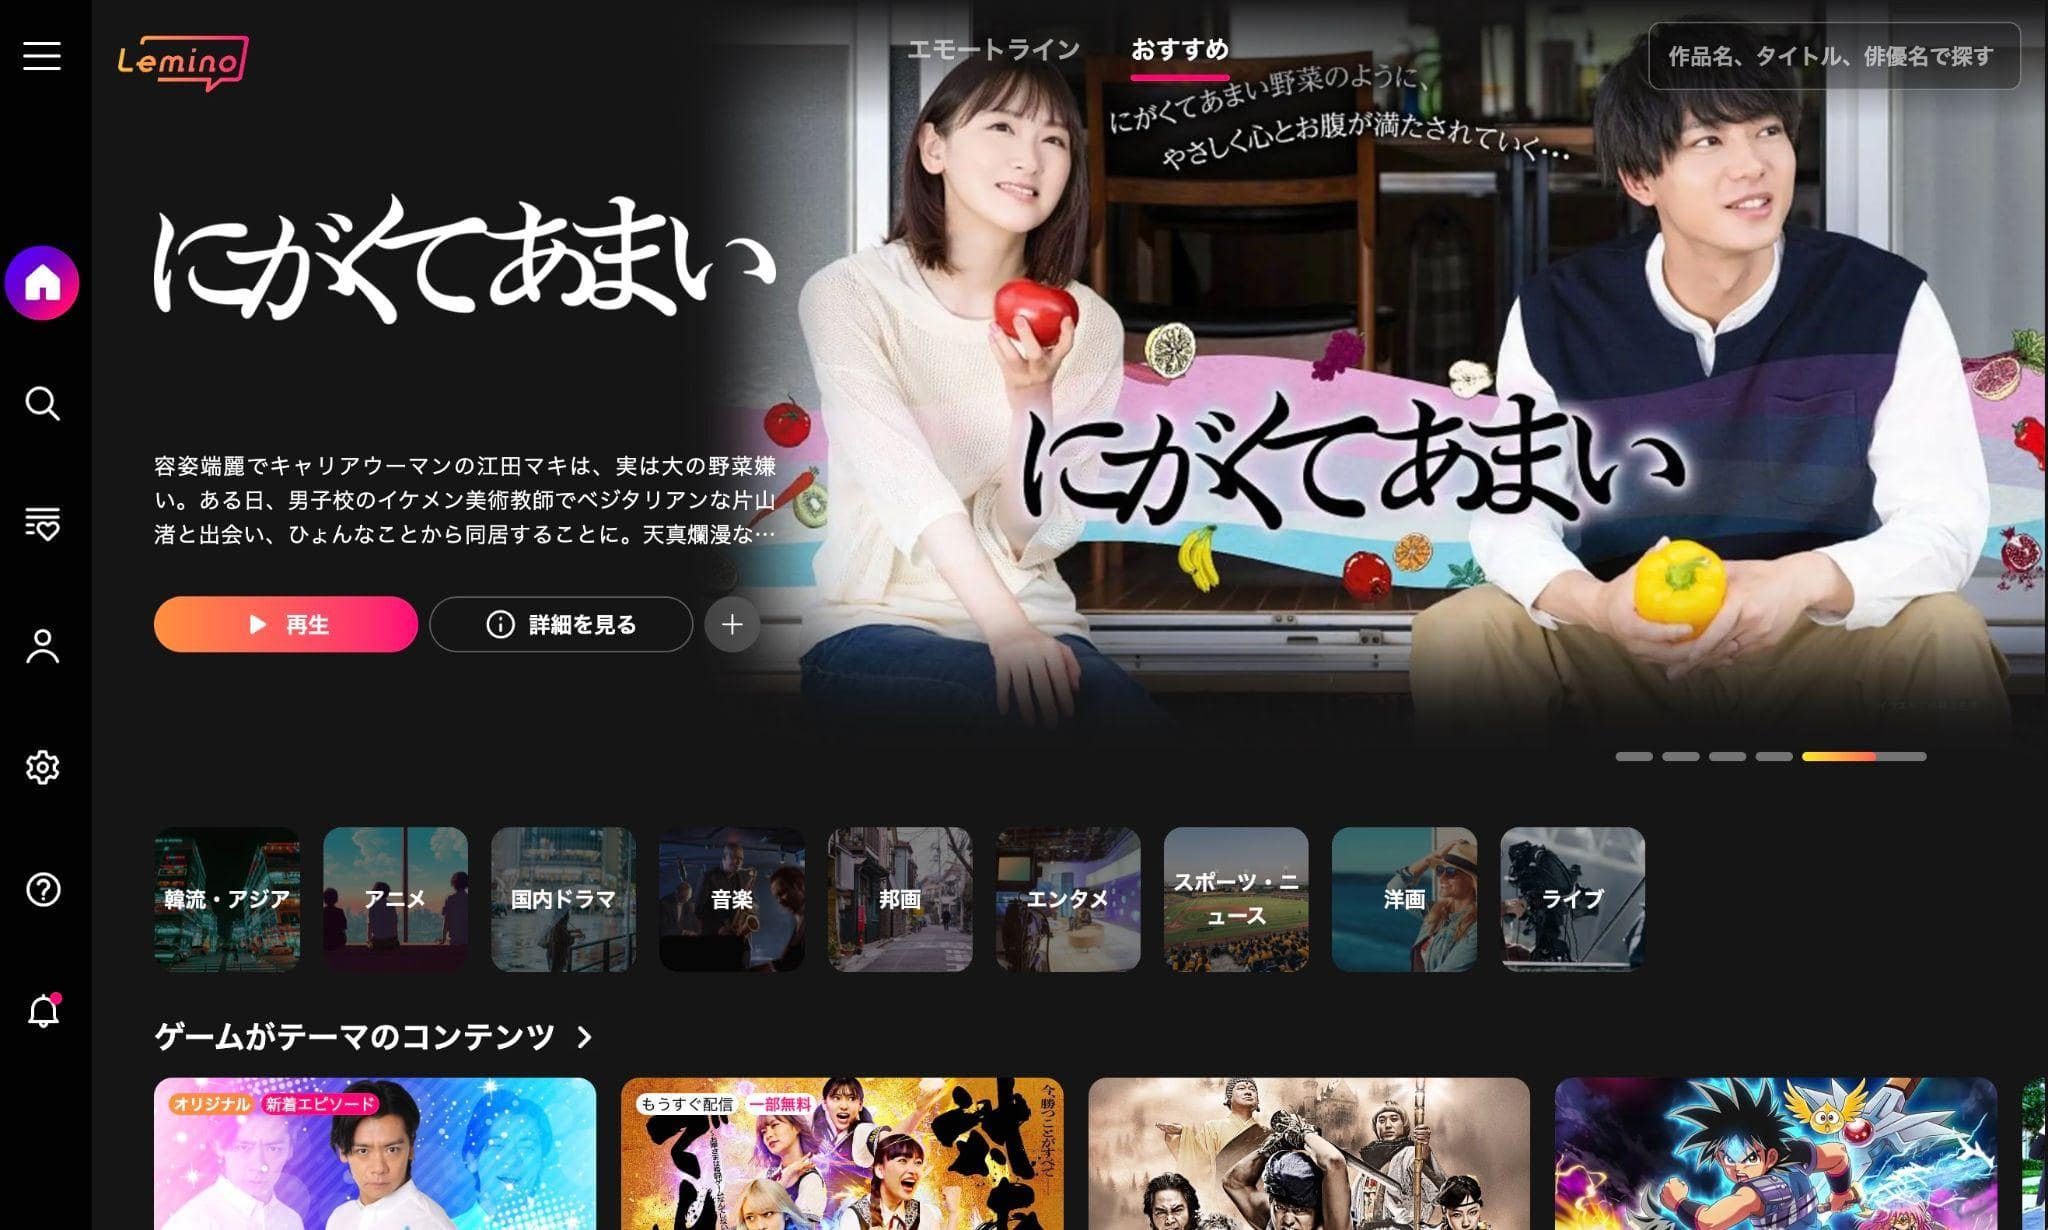 Lemino - a Japanese svod platform that has seen market share drop significantly in recent years.